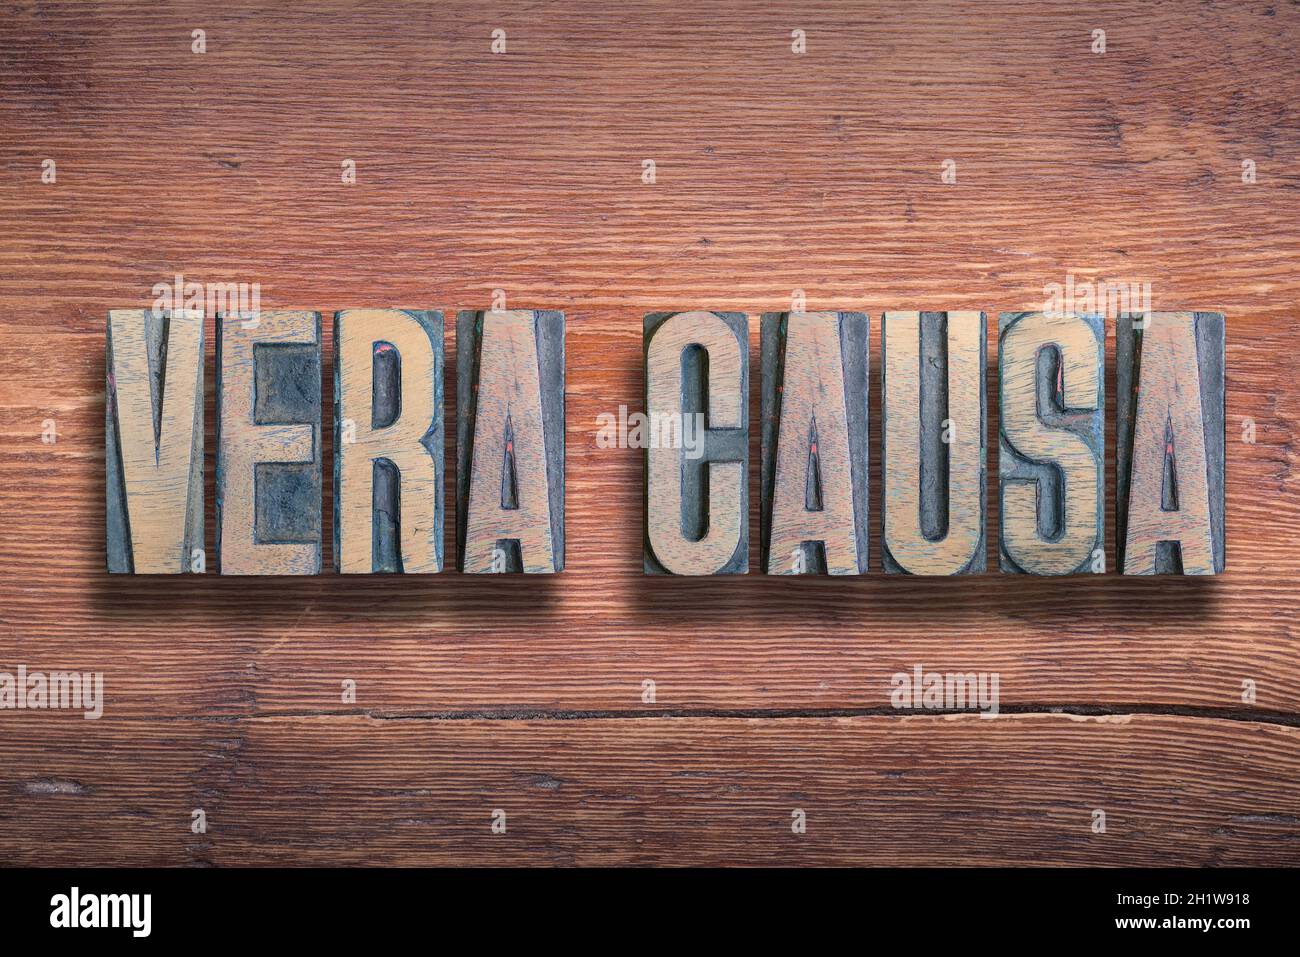 vera causa ancient Latin saying meaning - true case, combined on vintage varnished wooden surface Stock Photo